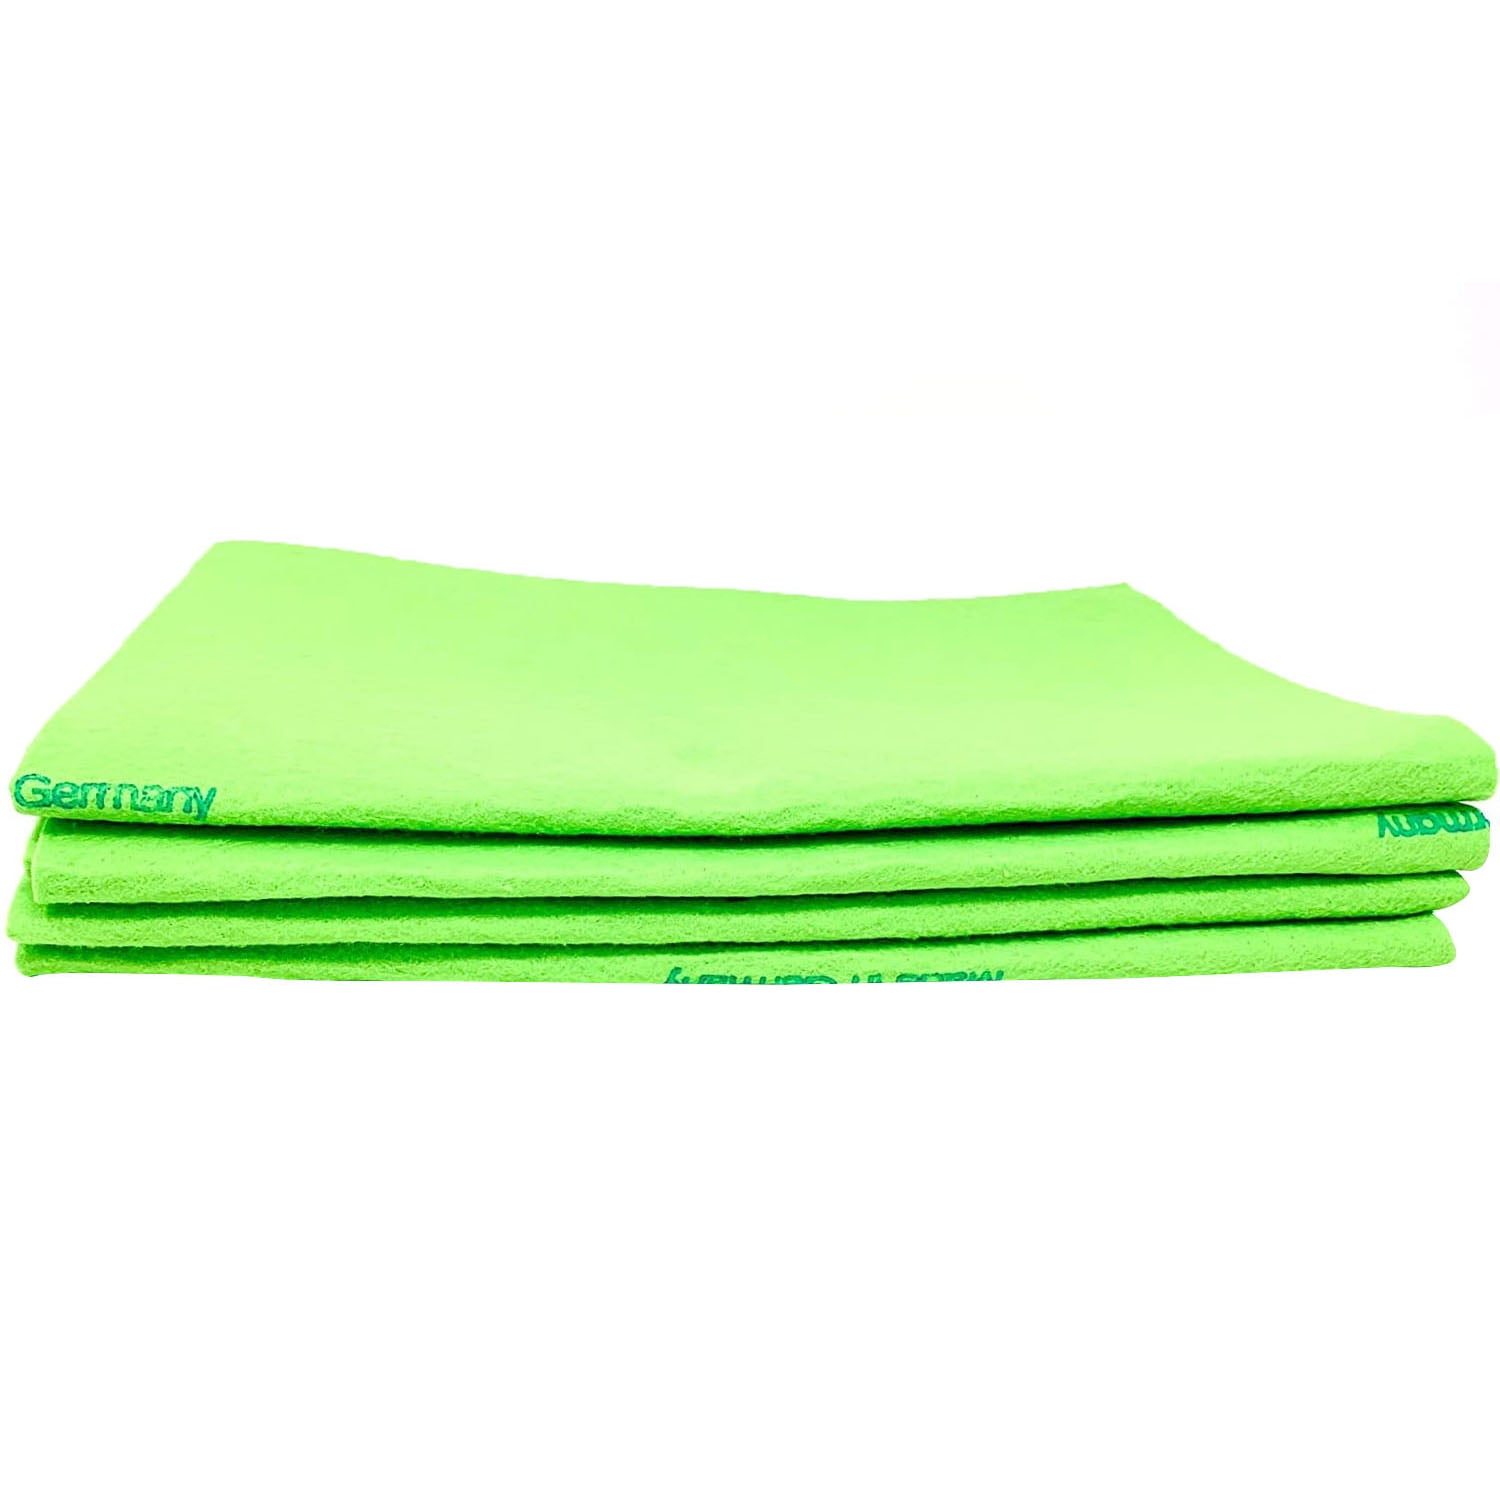 3 PK The Original German Shammy 20 X 27 Made in Germany SHAMMIES Towels Chamois for sale online 